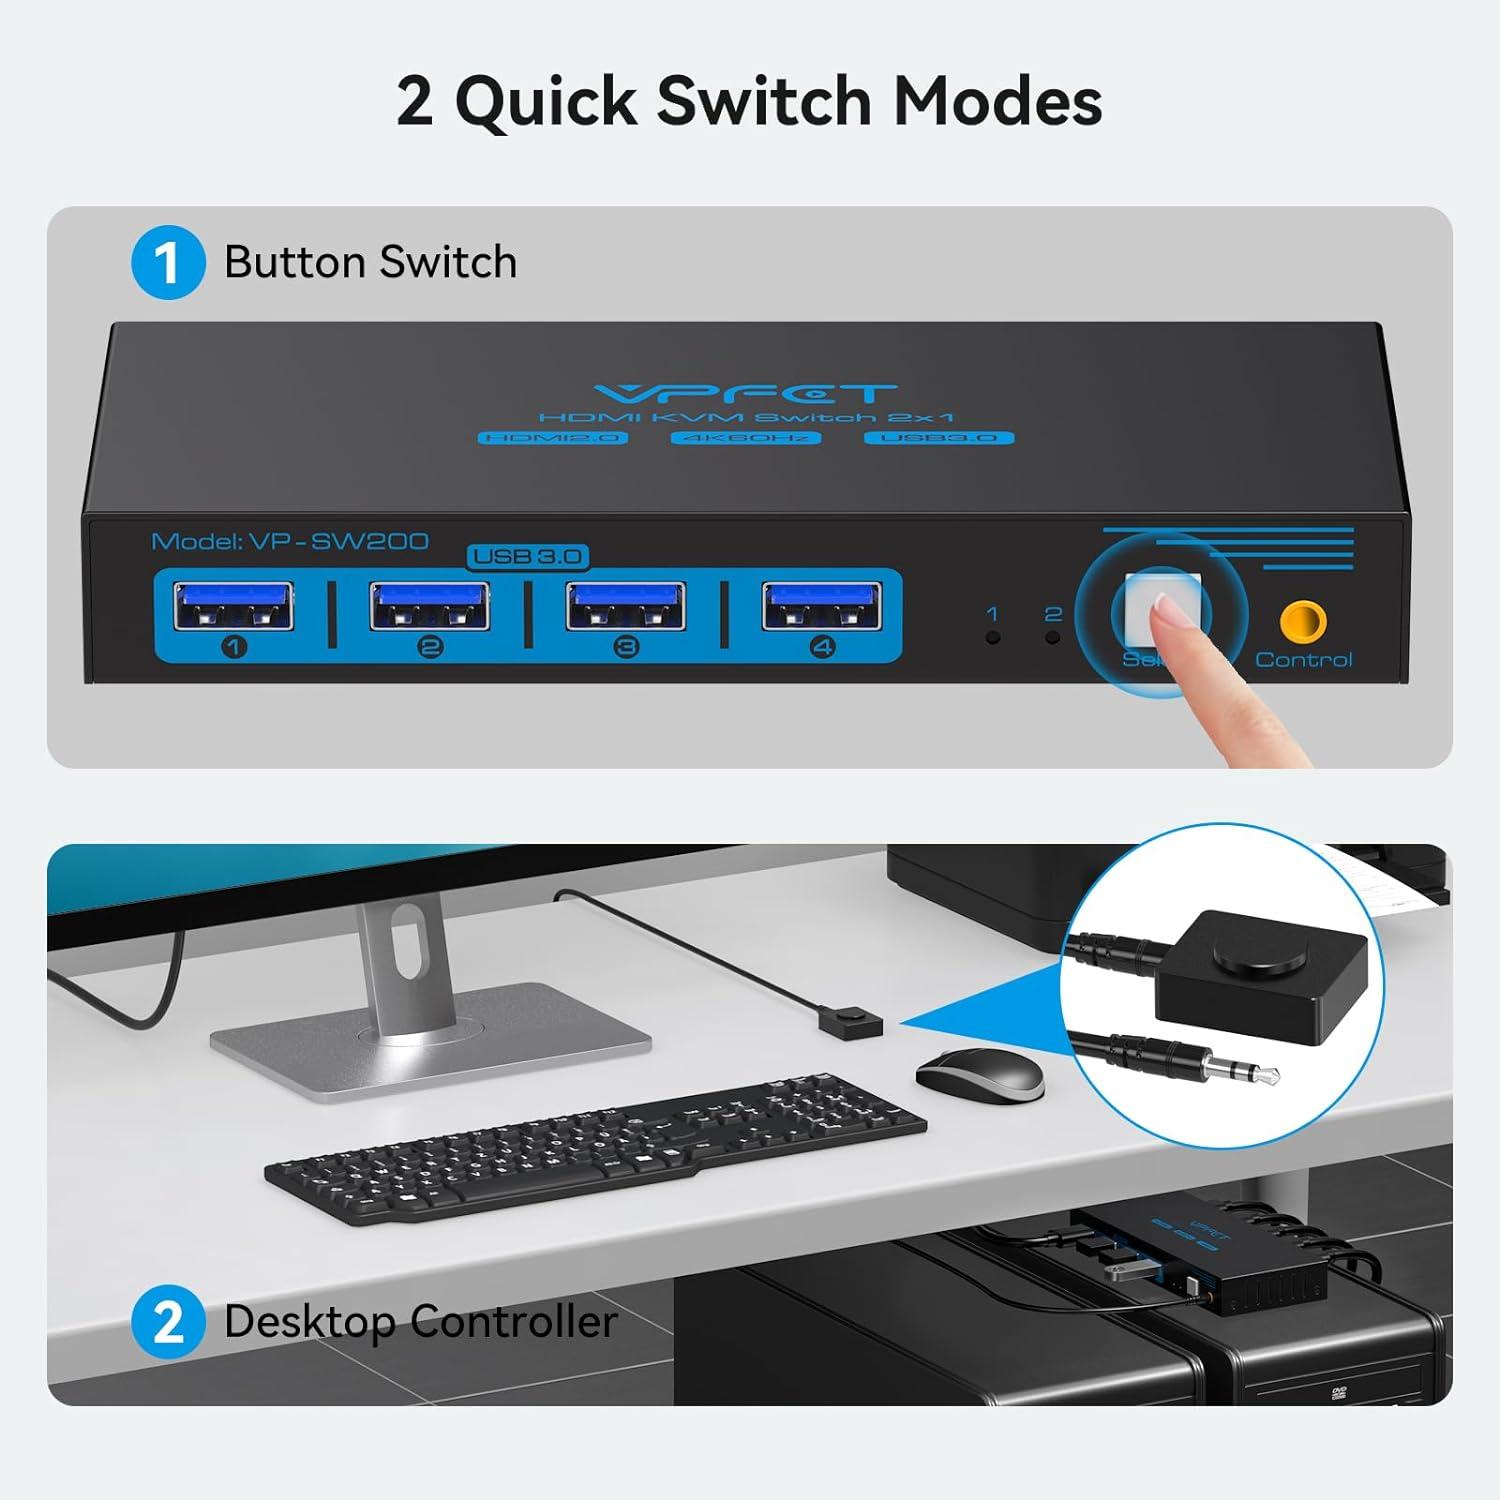  USB 3.0 Switch 2 Computers Share 4-Port USB3.1 USB3.0 - Select  2 PC by One Panel Button, 4 USB Peripheral Hub for Mouse Keyboard Printer  PC, Mac Windows Linux, 2pc USB-A